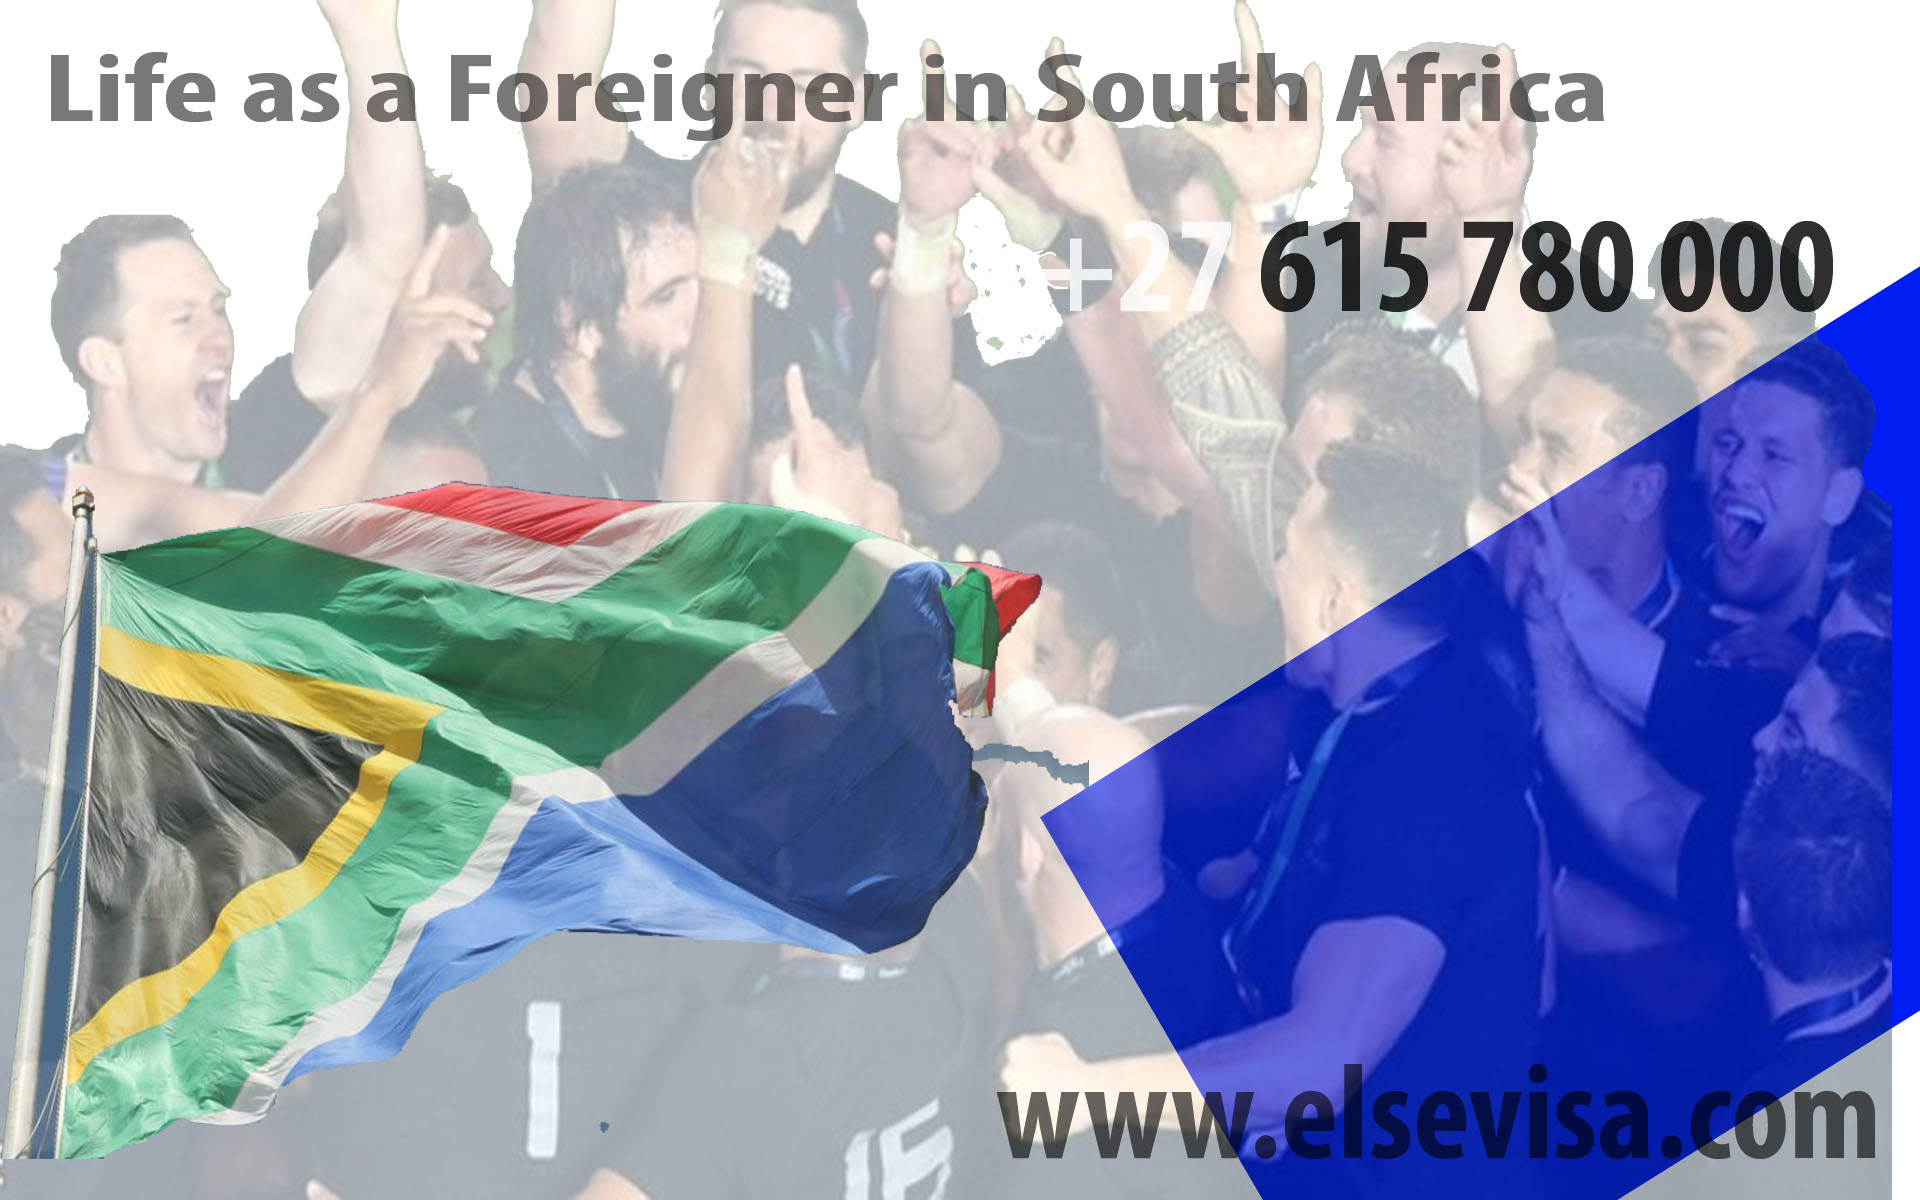 Life as a Foreigner in South Africa  | foreigners in south africa | South Africa tourist visa